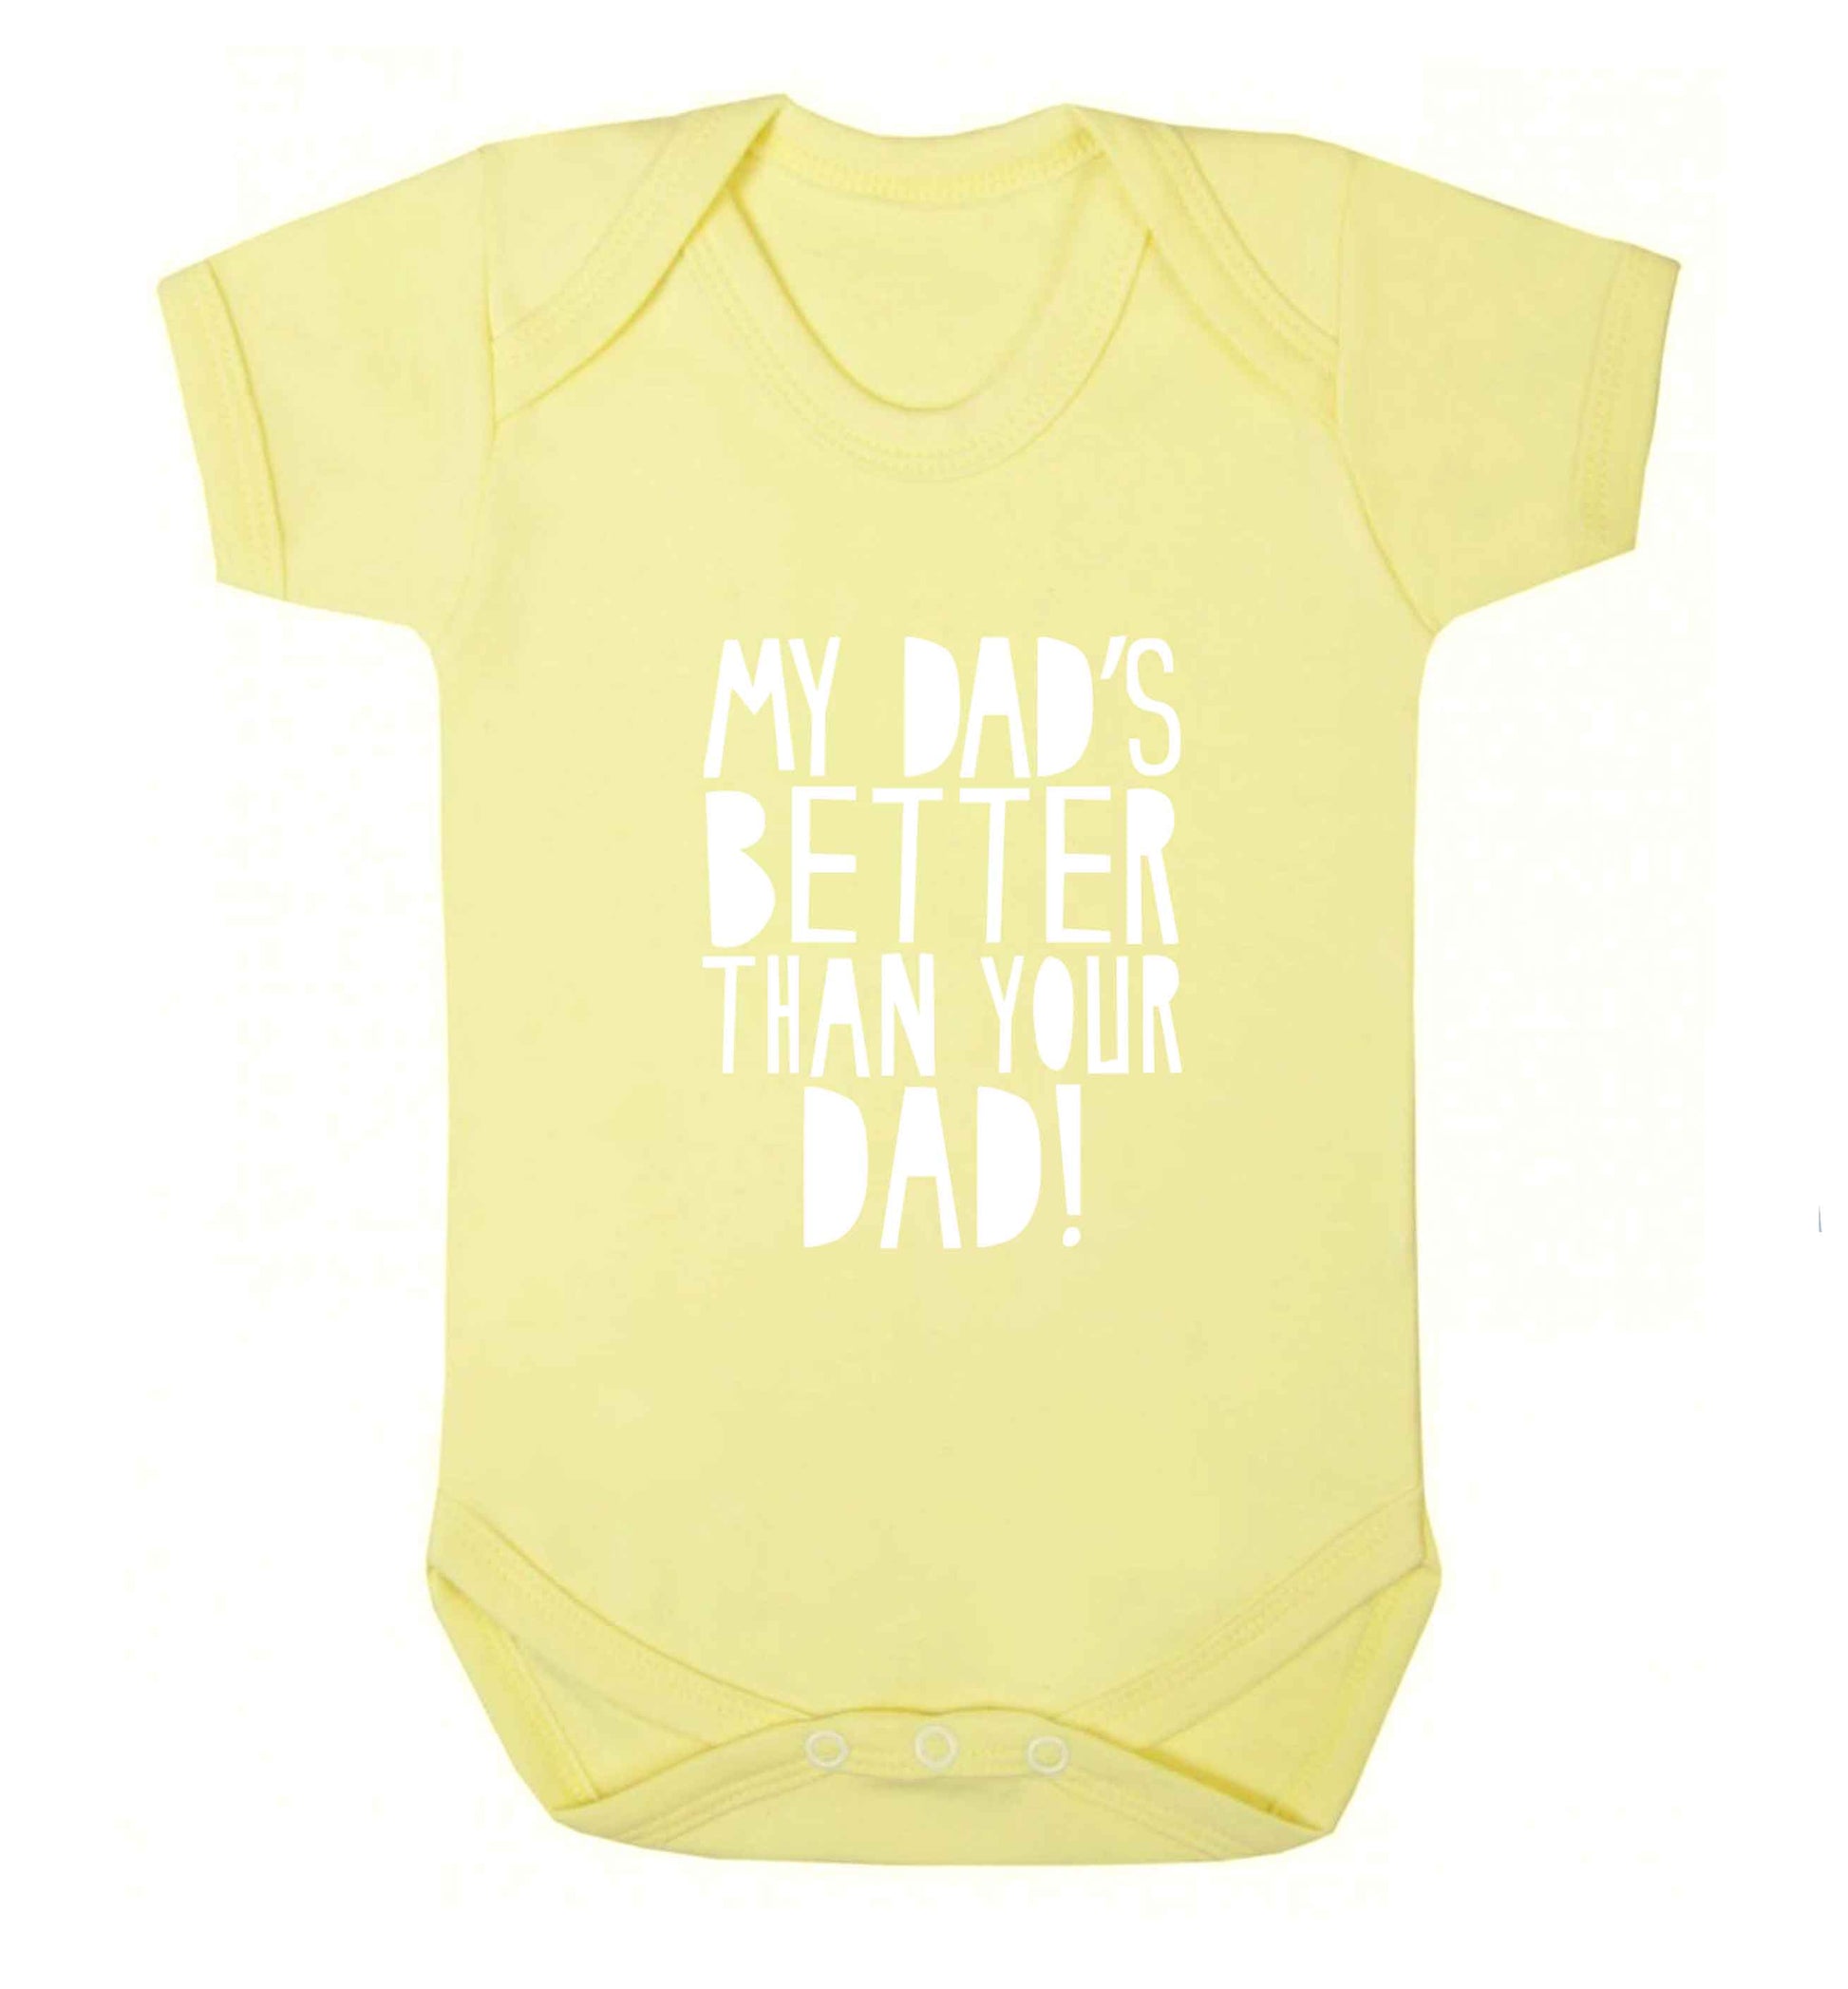 My dad's better than your dad! baby vest pale yellow 18-24 months